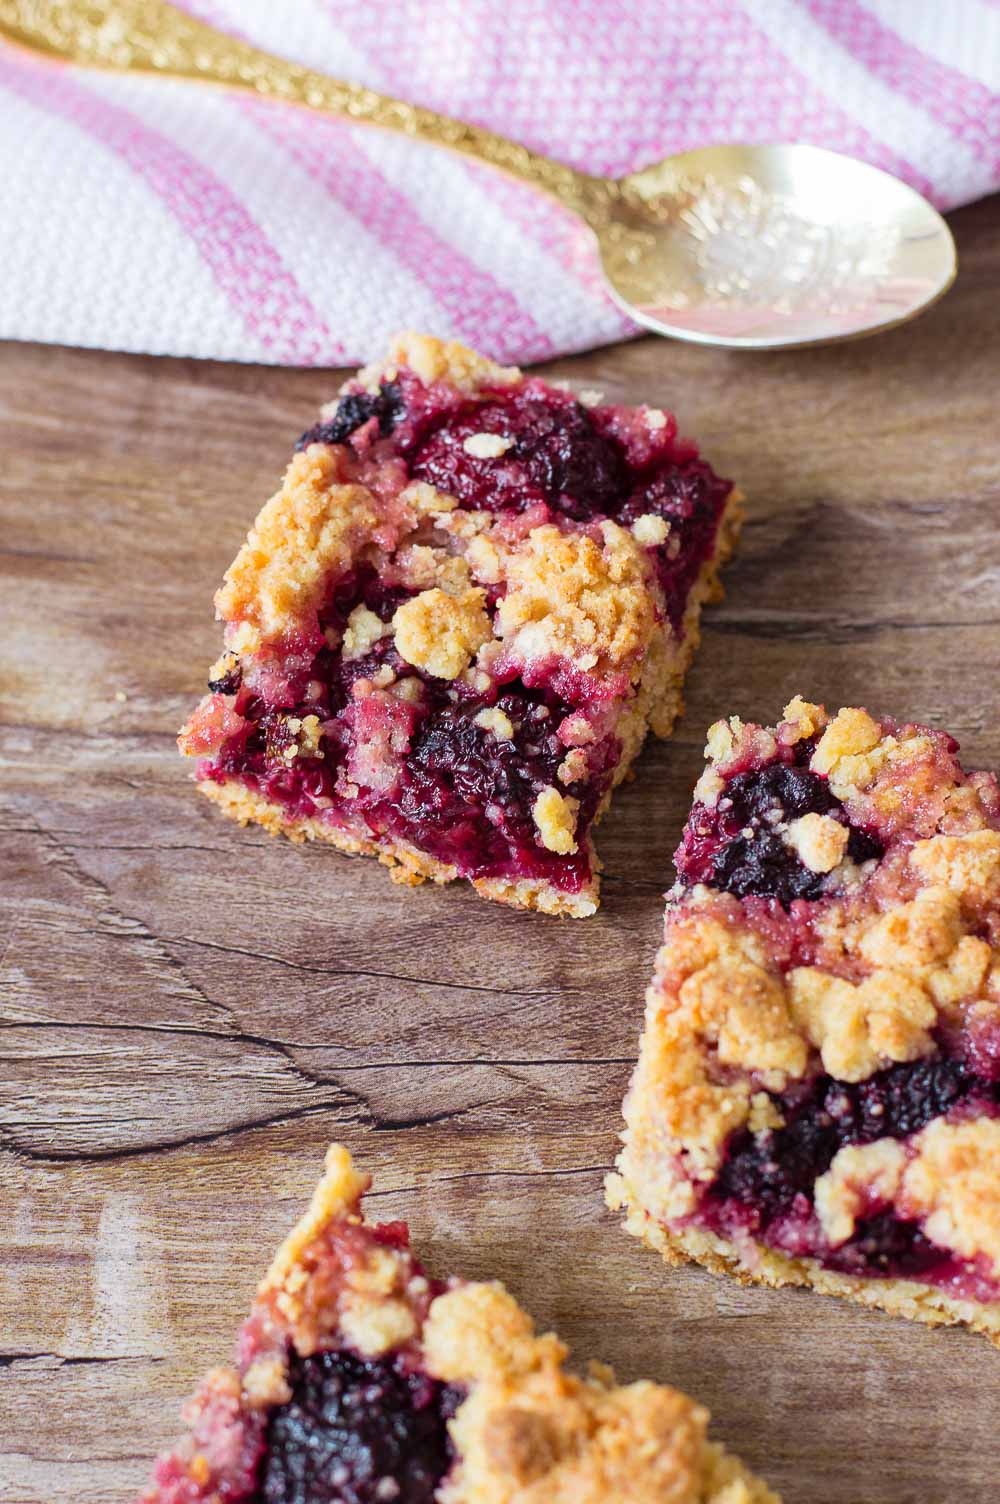 Easy Blackberry Crumb Bars. These blackberry crumb bars are a favorite for the summertime. They are filled with fresh blackberries and topped with crumbly crumbs. So easy to make and perfect for your next gathering or party.